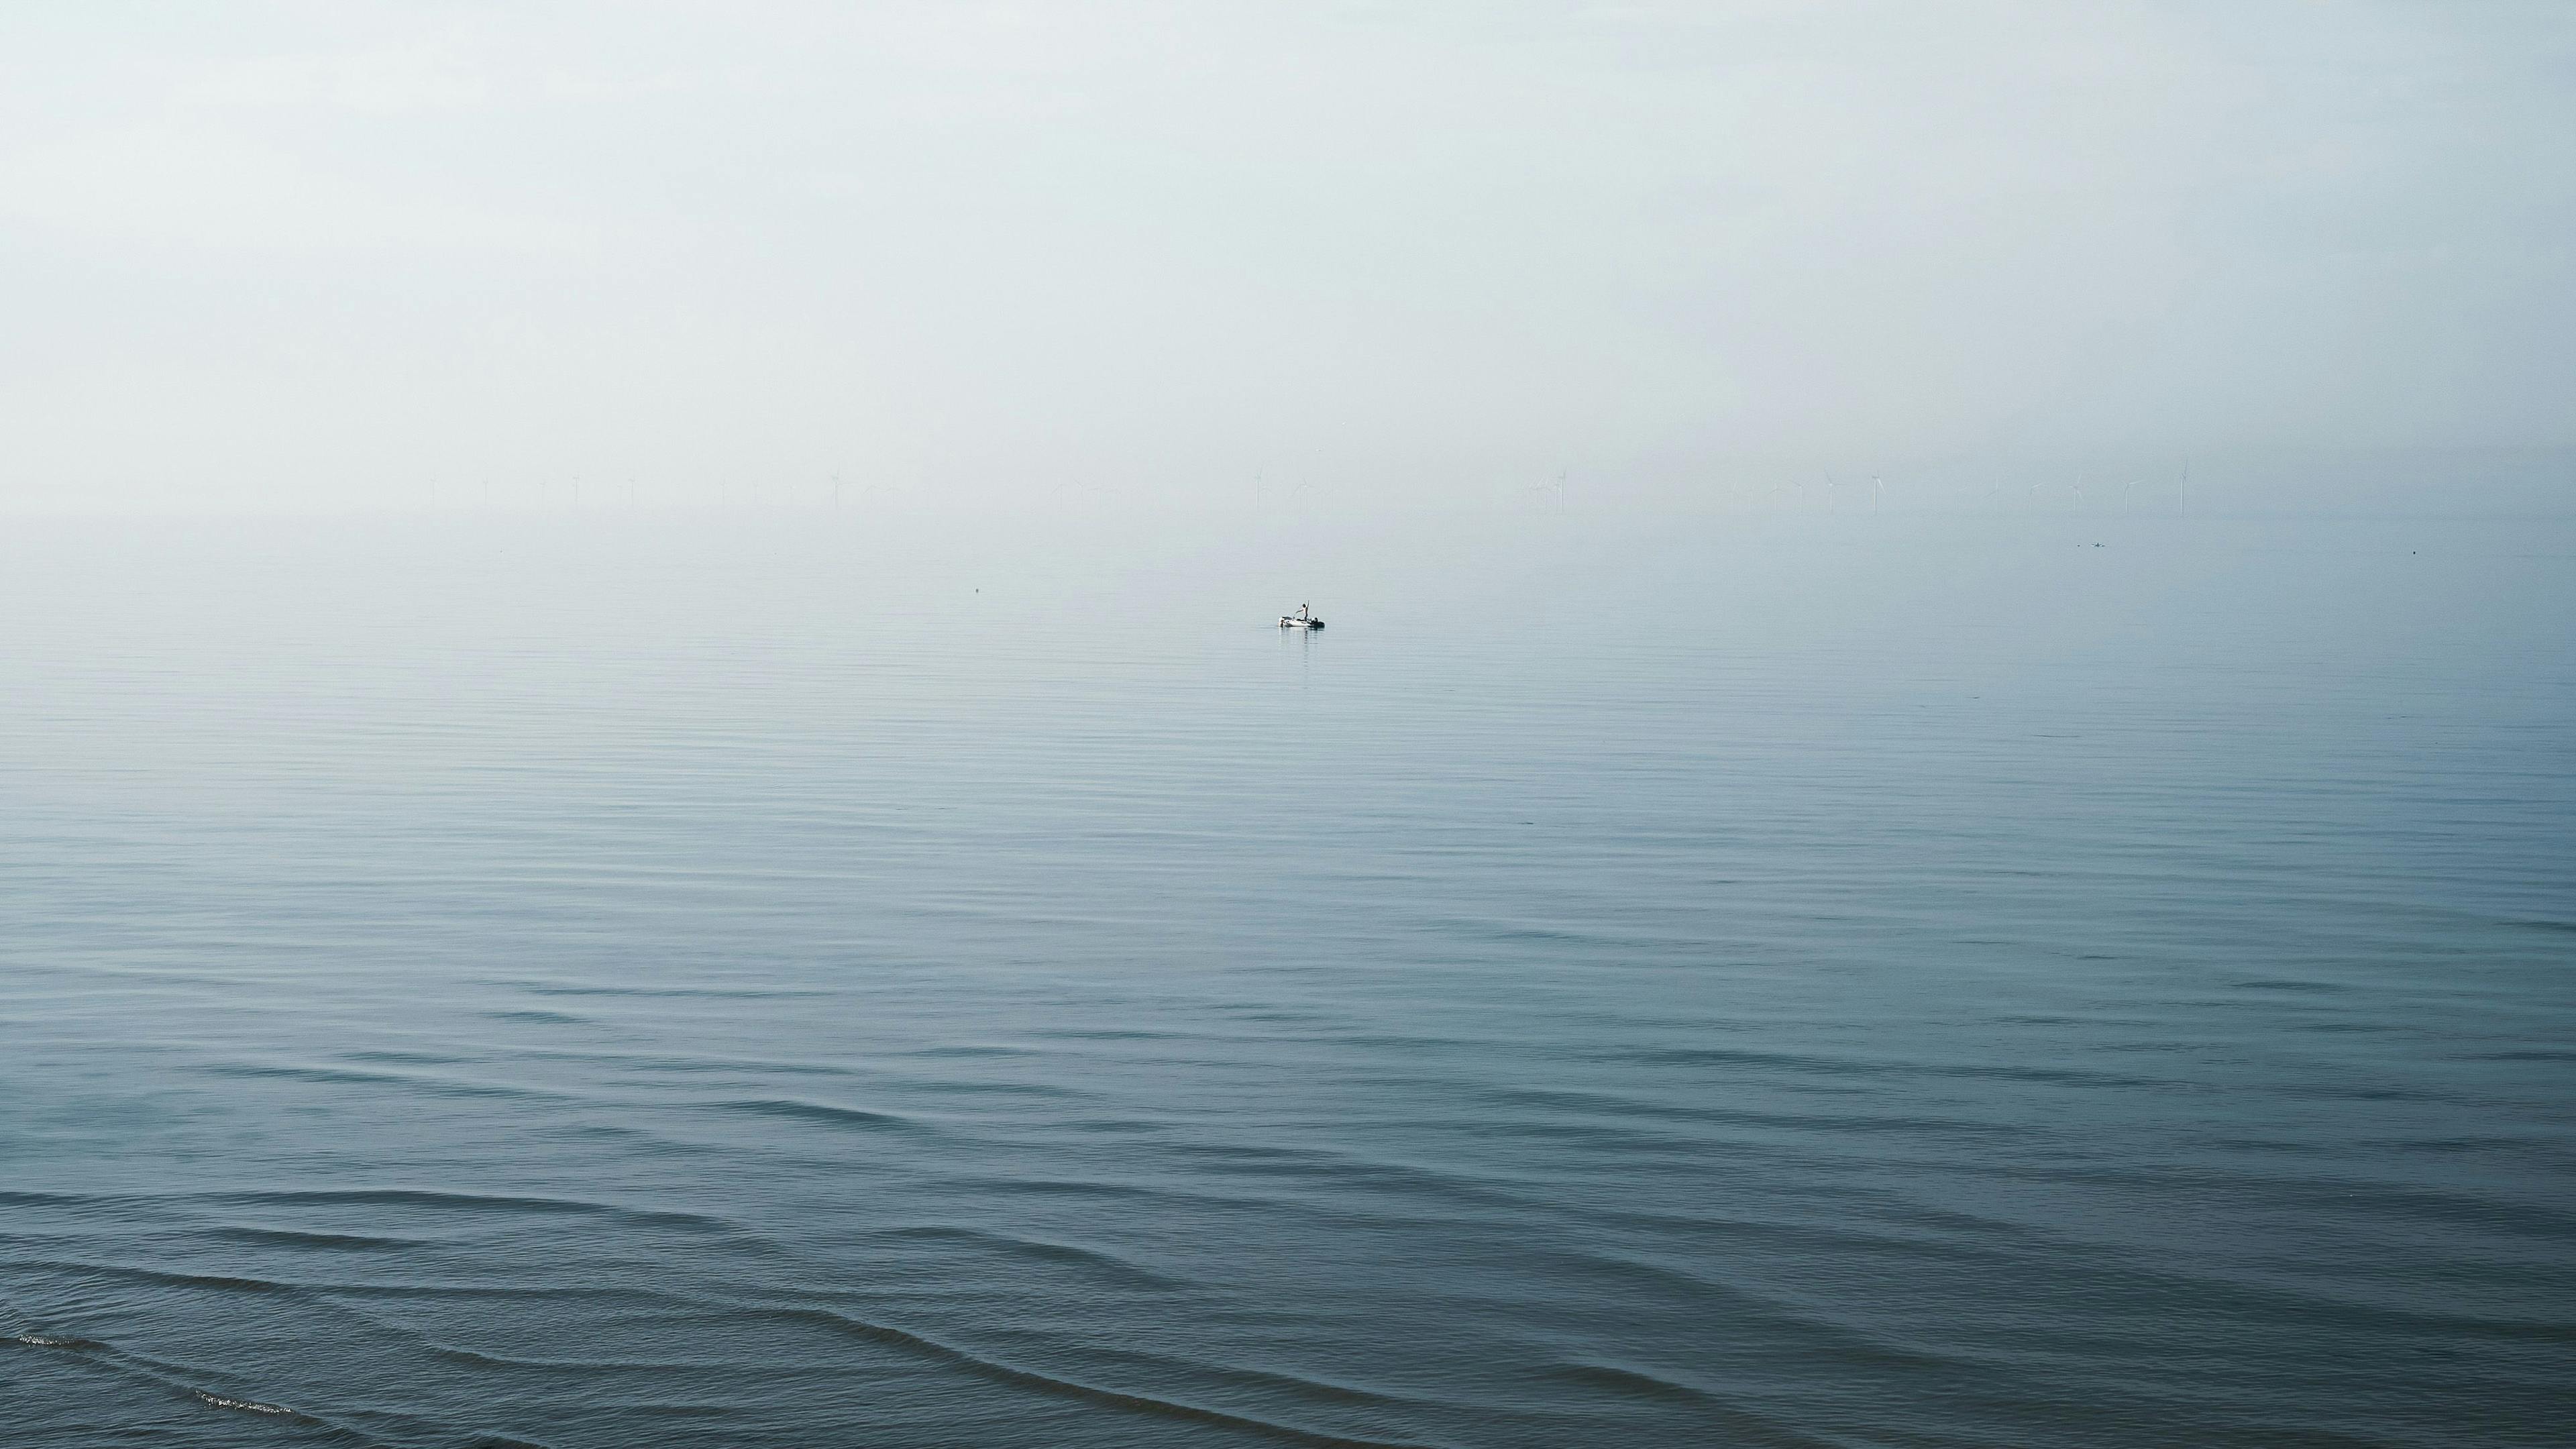 A lone boat disappearing into the haze of blue sea